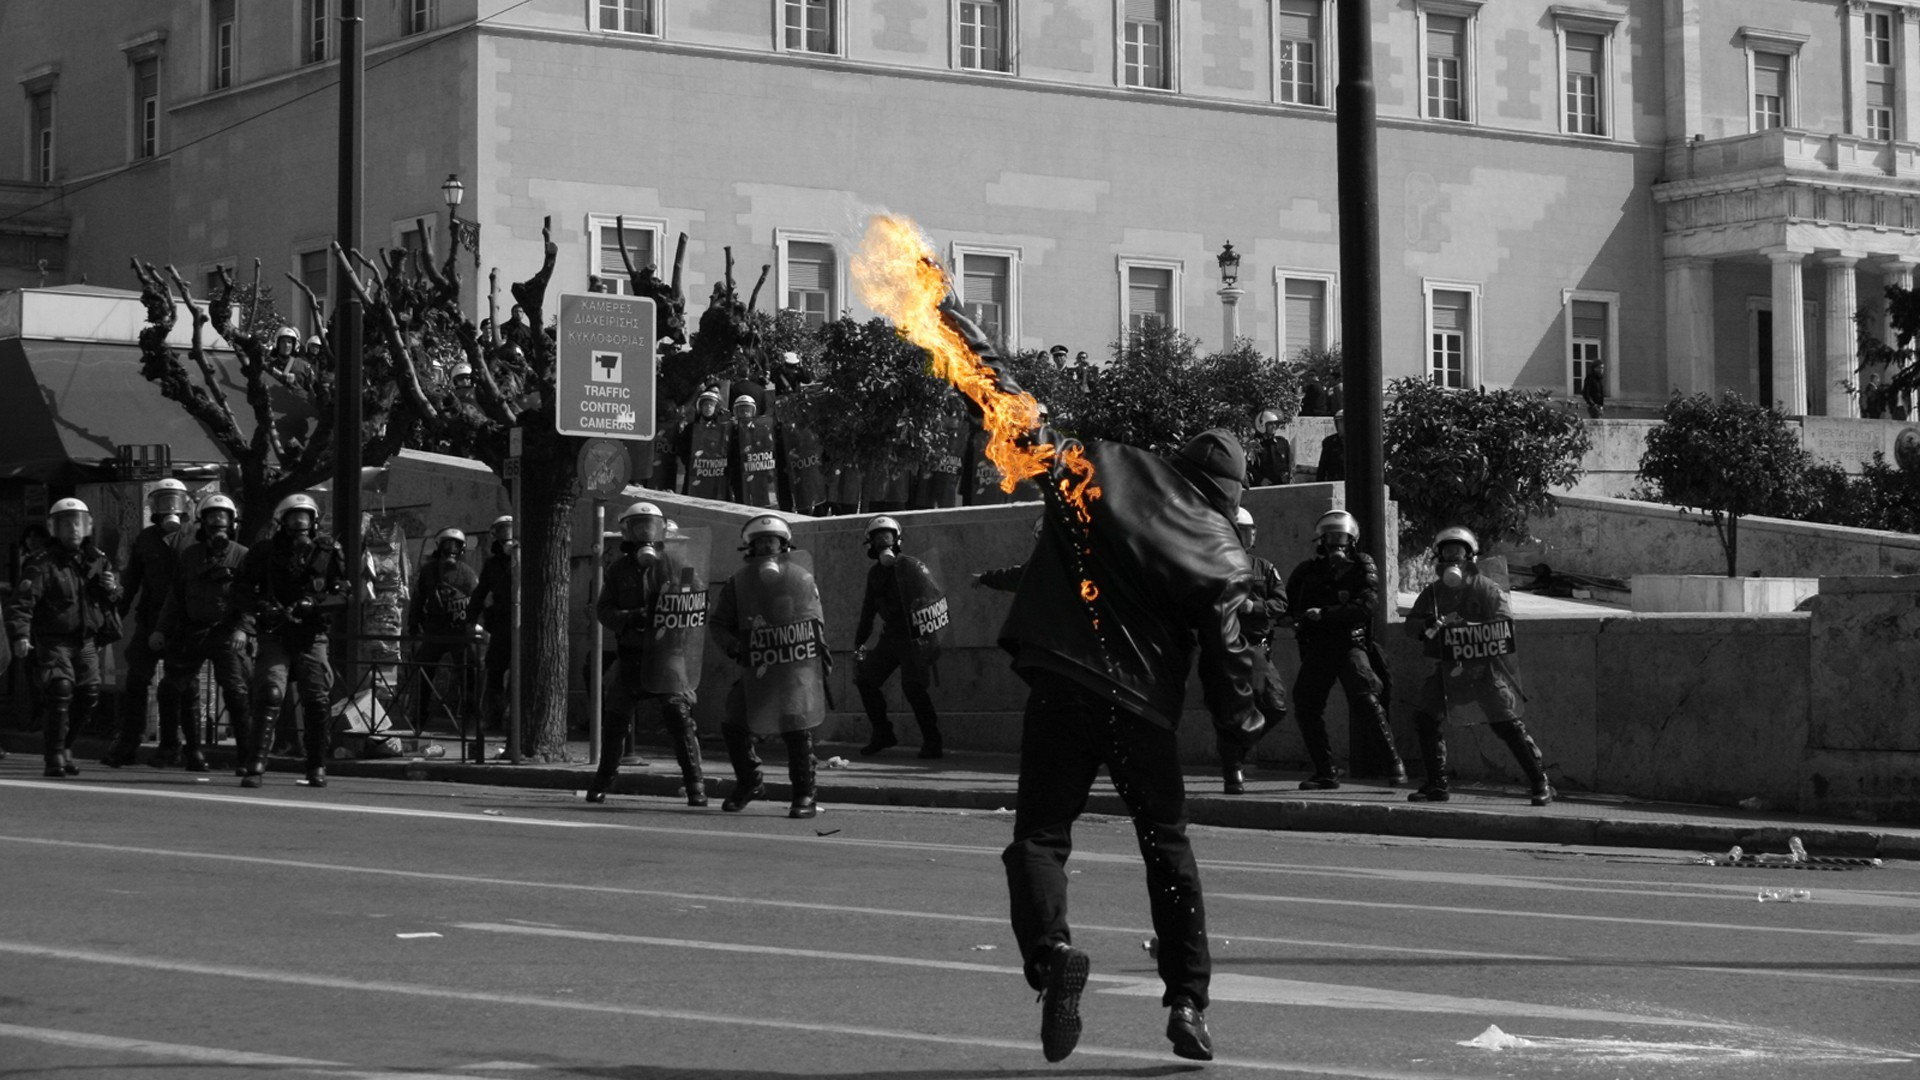 1920x1080 It's an anarchist throwing a molotov, ...